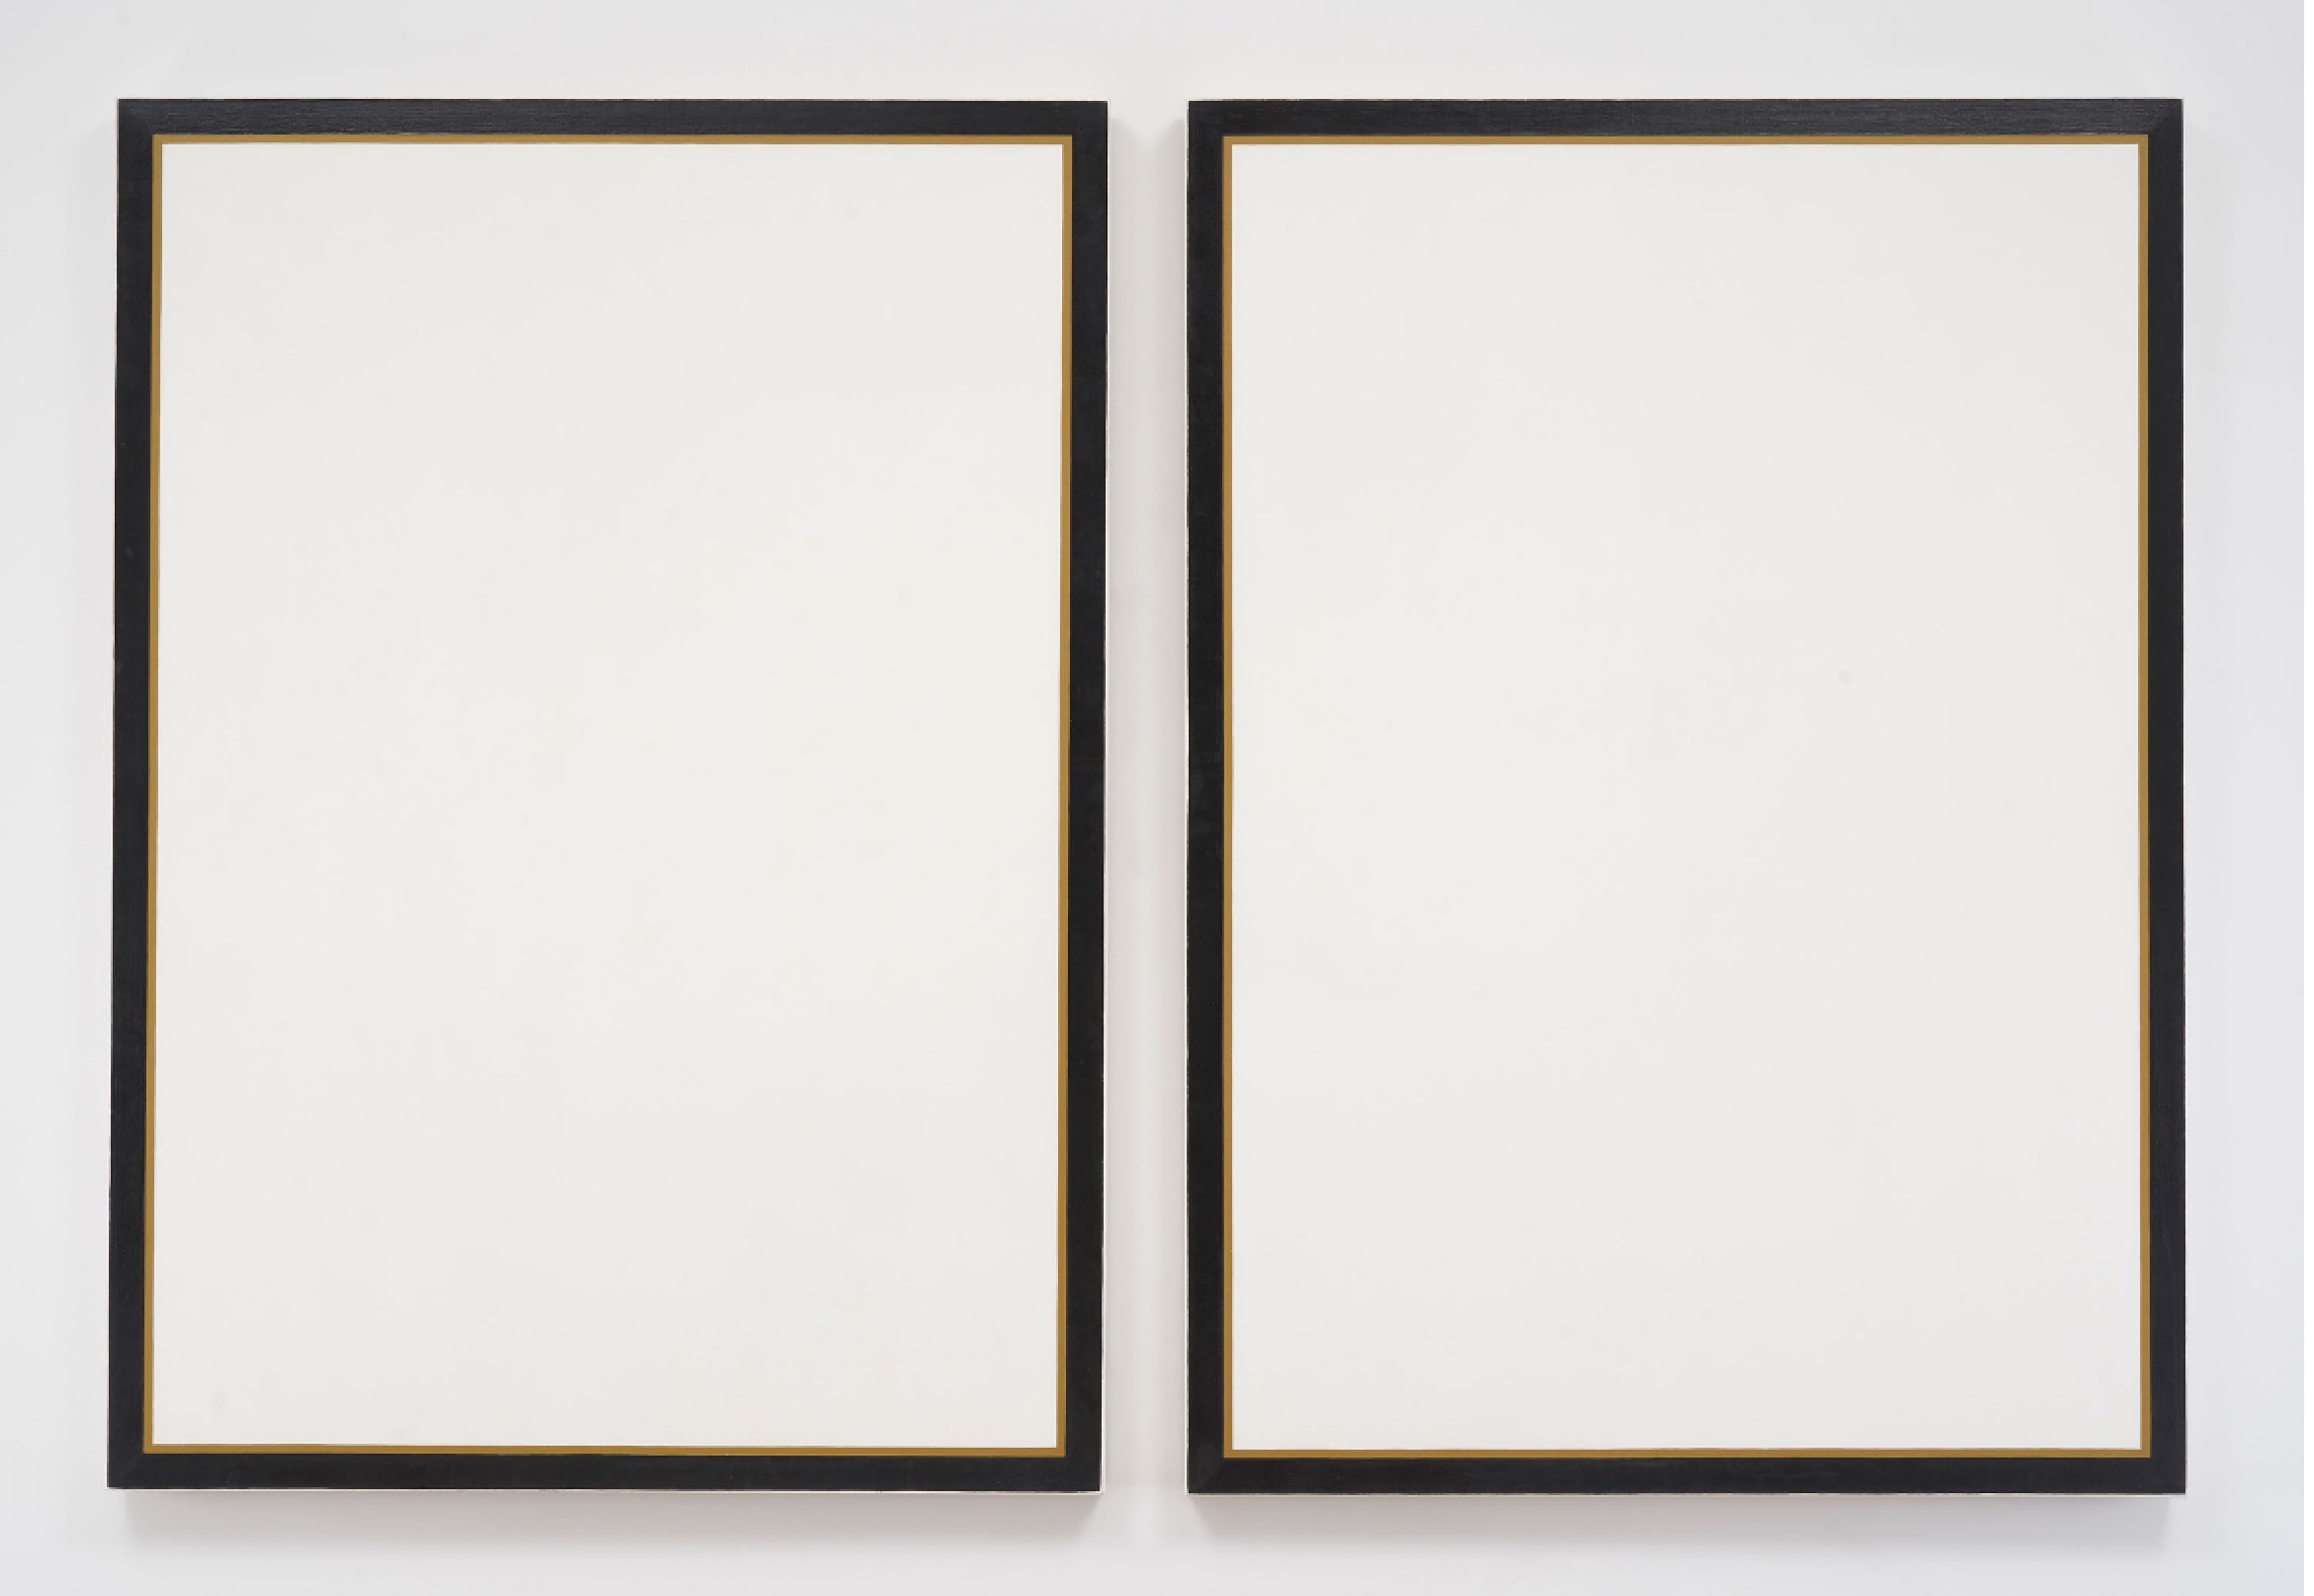 Jo Baer Untitled Diptych, 1966-1968 oil on canvas - image courtesy Pace Gallery